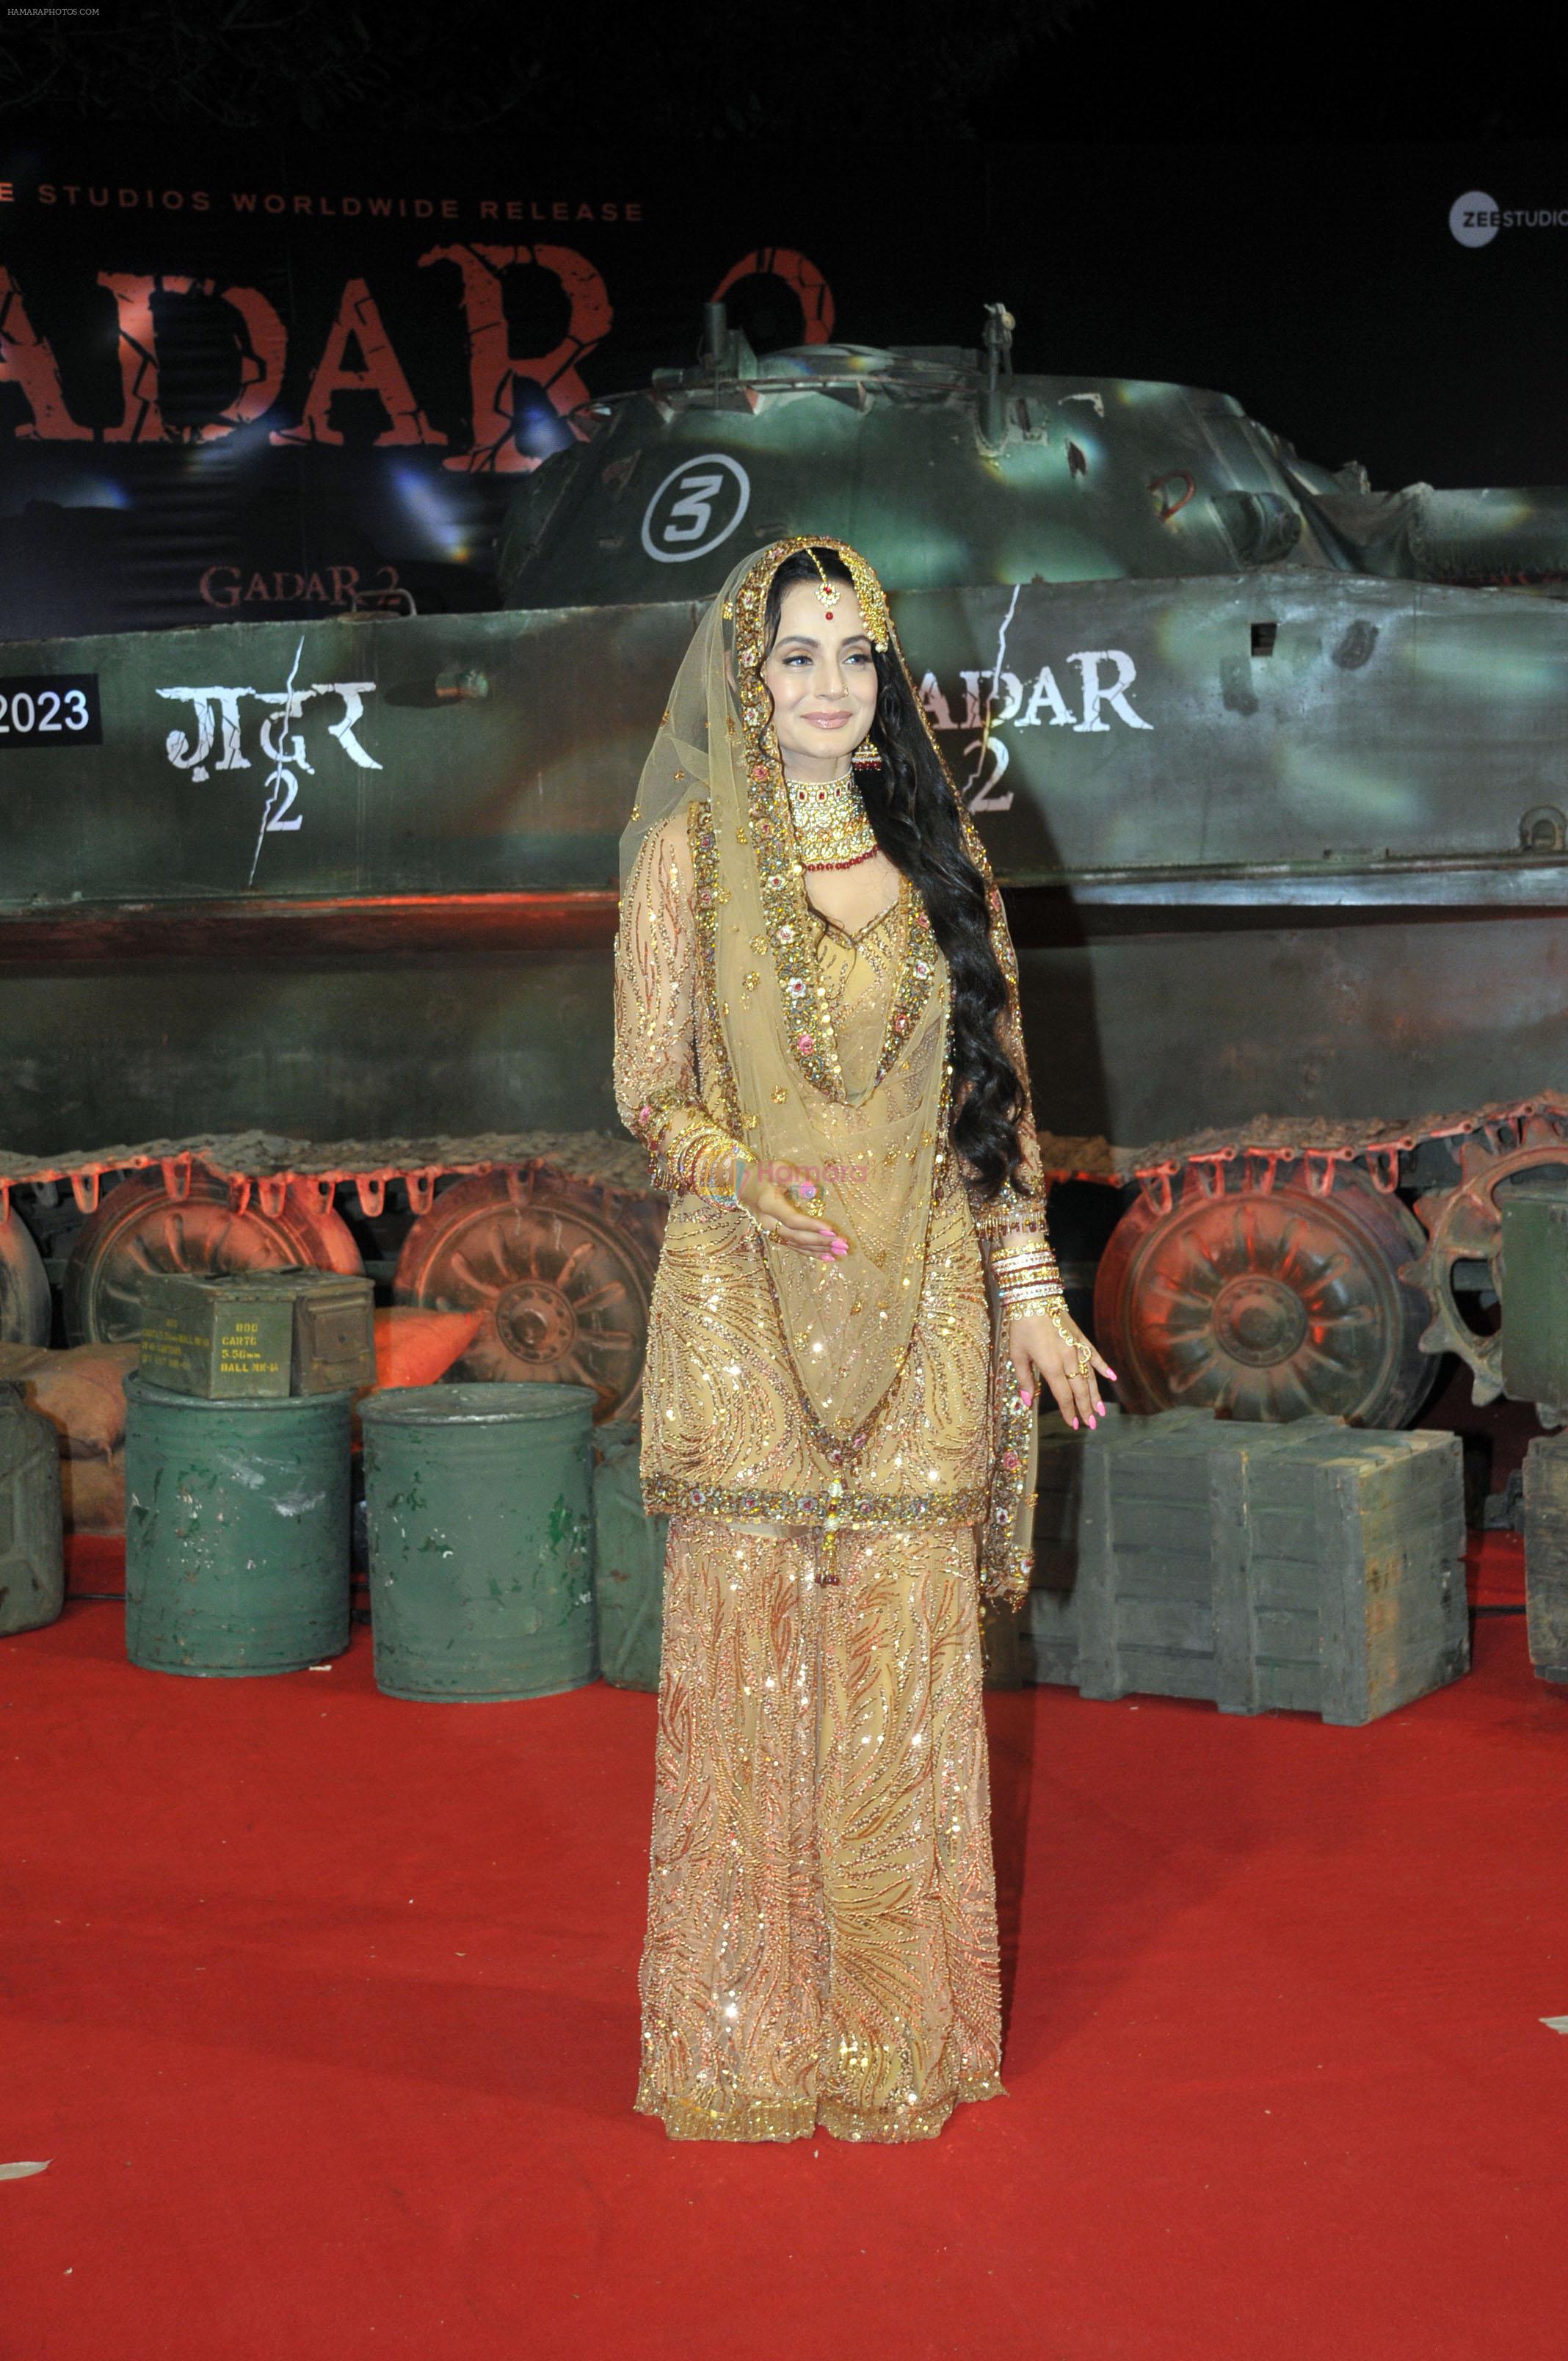 Ameesha Patel at the Grand Premiere of Film Gadar 2 on 11th August 2023